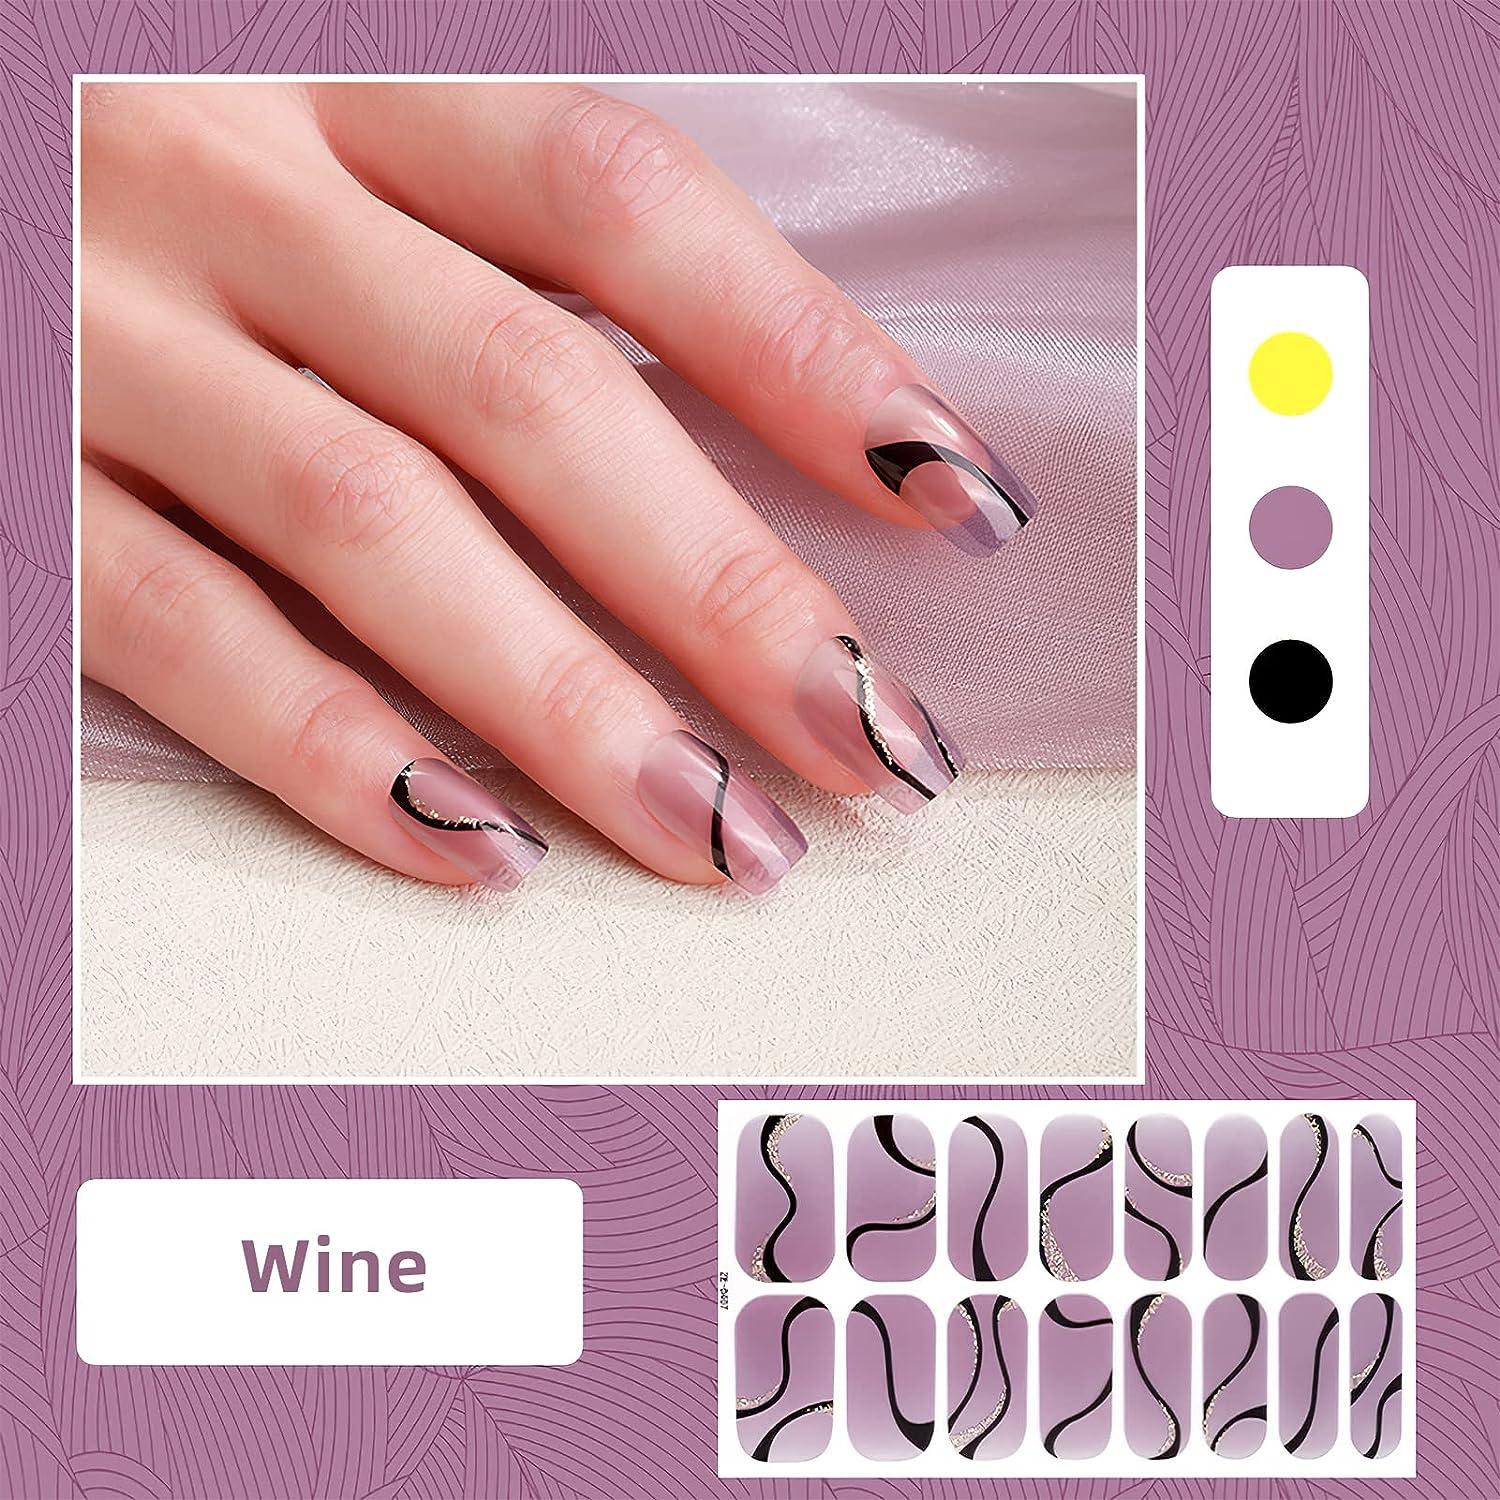 Amazon.com: Techinal Semi Cured Gel Nail Polish Stickers Fashion Design  Classical Strips Waterproof Adhesive Full Wraps Gel Nail Art Stickers :  Beauty & Personal Care